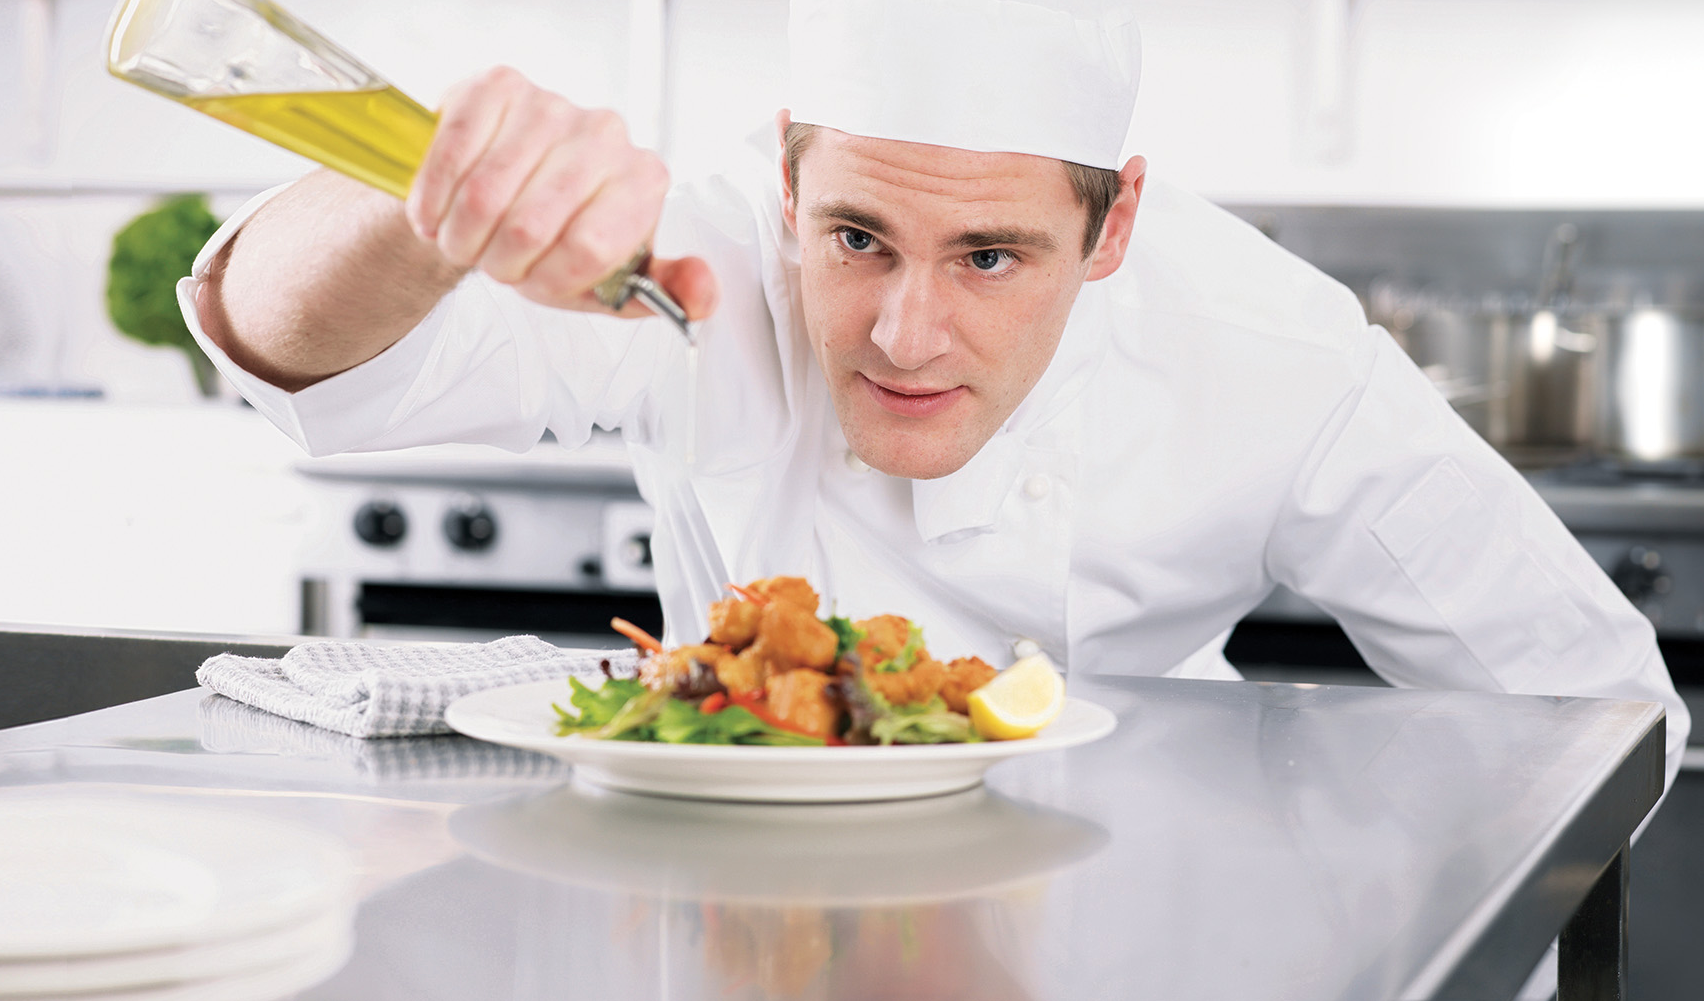 Peerless Foodservice for Foodservice